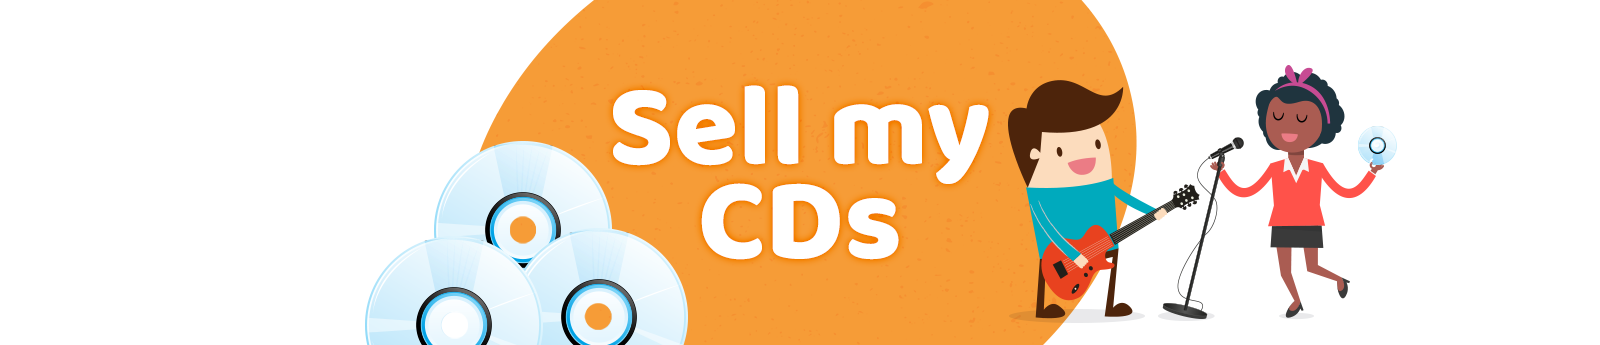 Sell my CDs